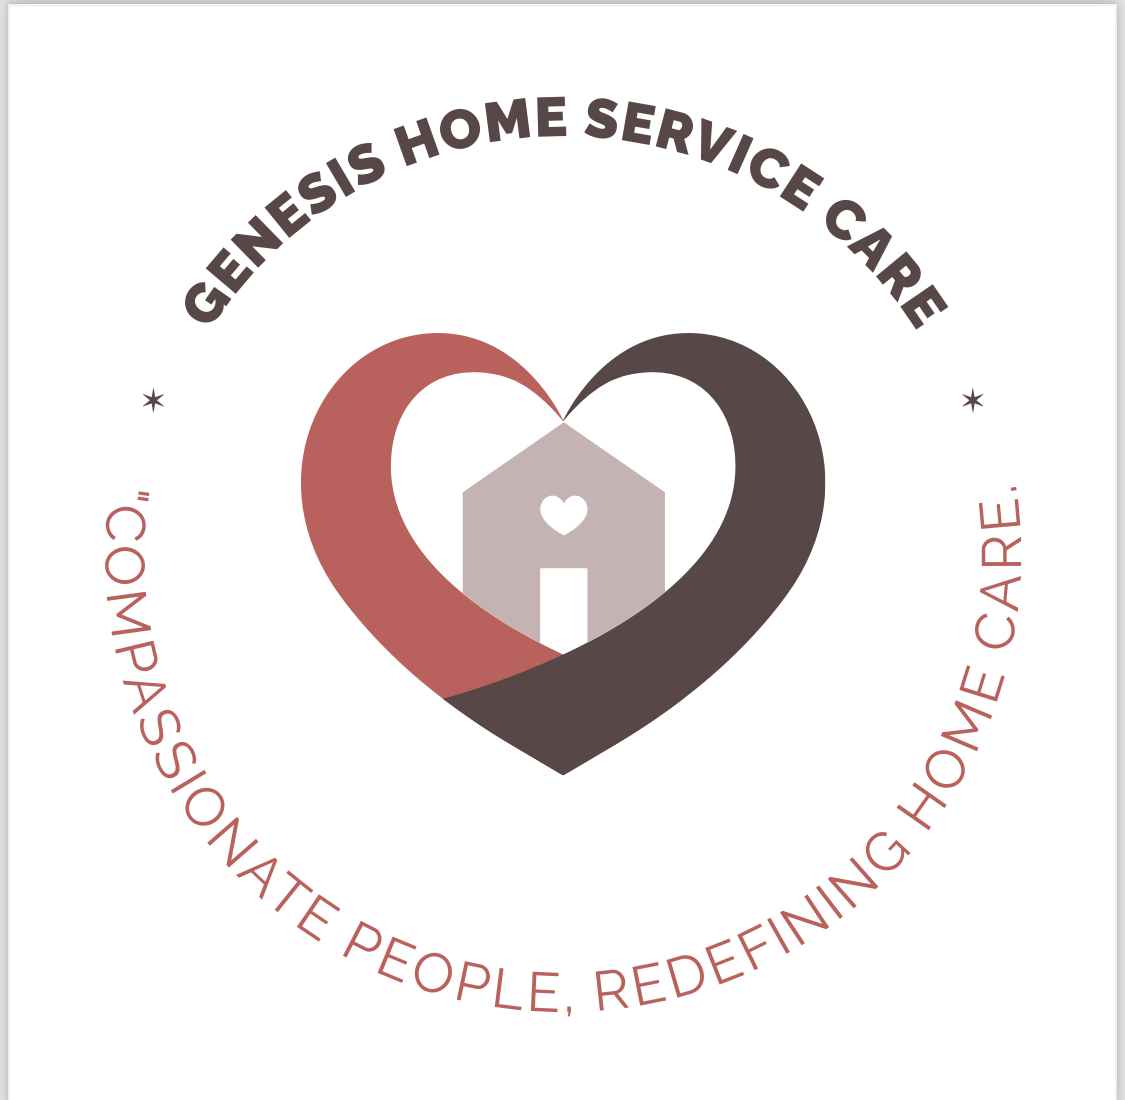 Genesis Home Service Care at Chicago, IL